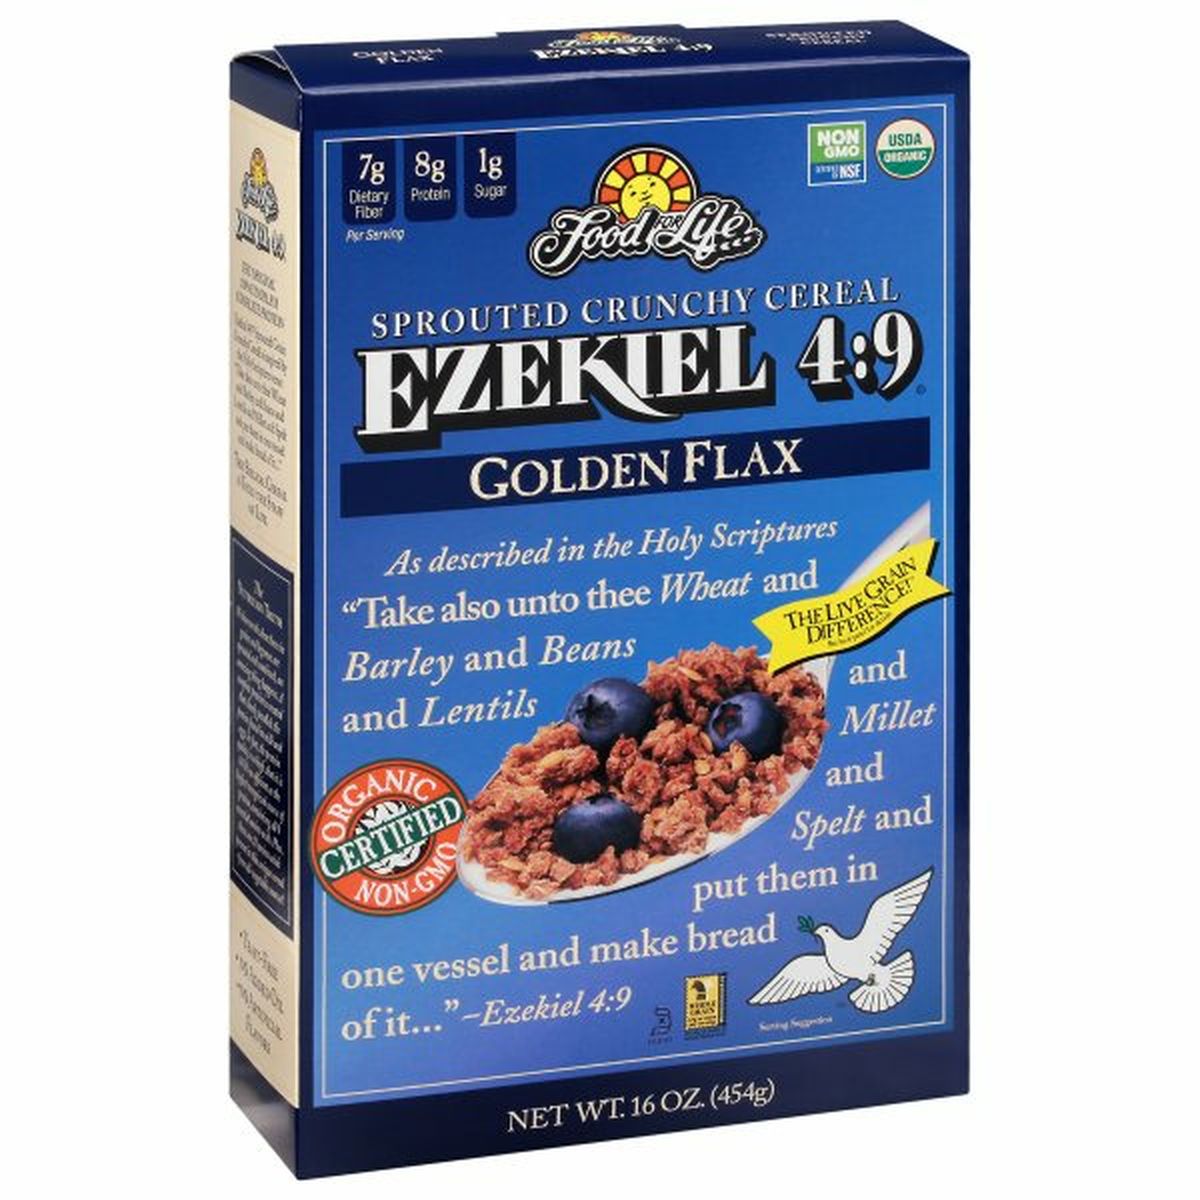 Calories in Food for Life Ezekiel 4:9 Cereal, Sprouted Crunchy, Golden Flax